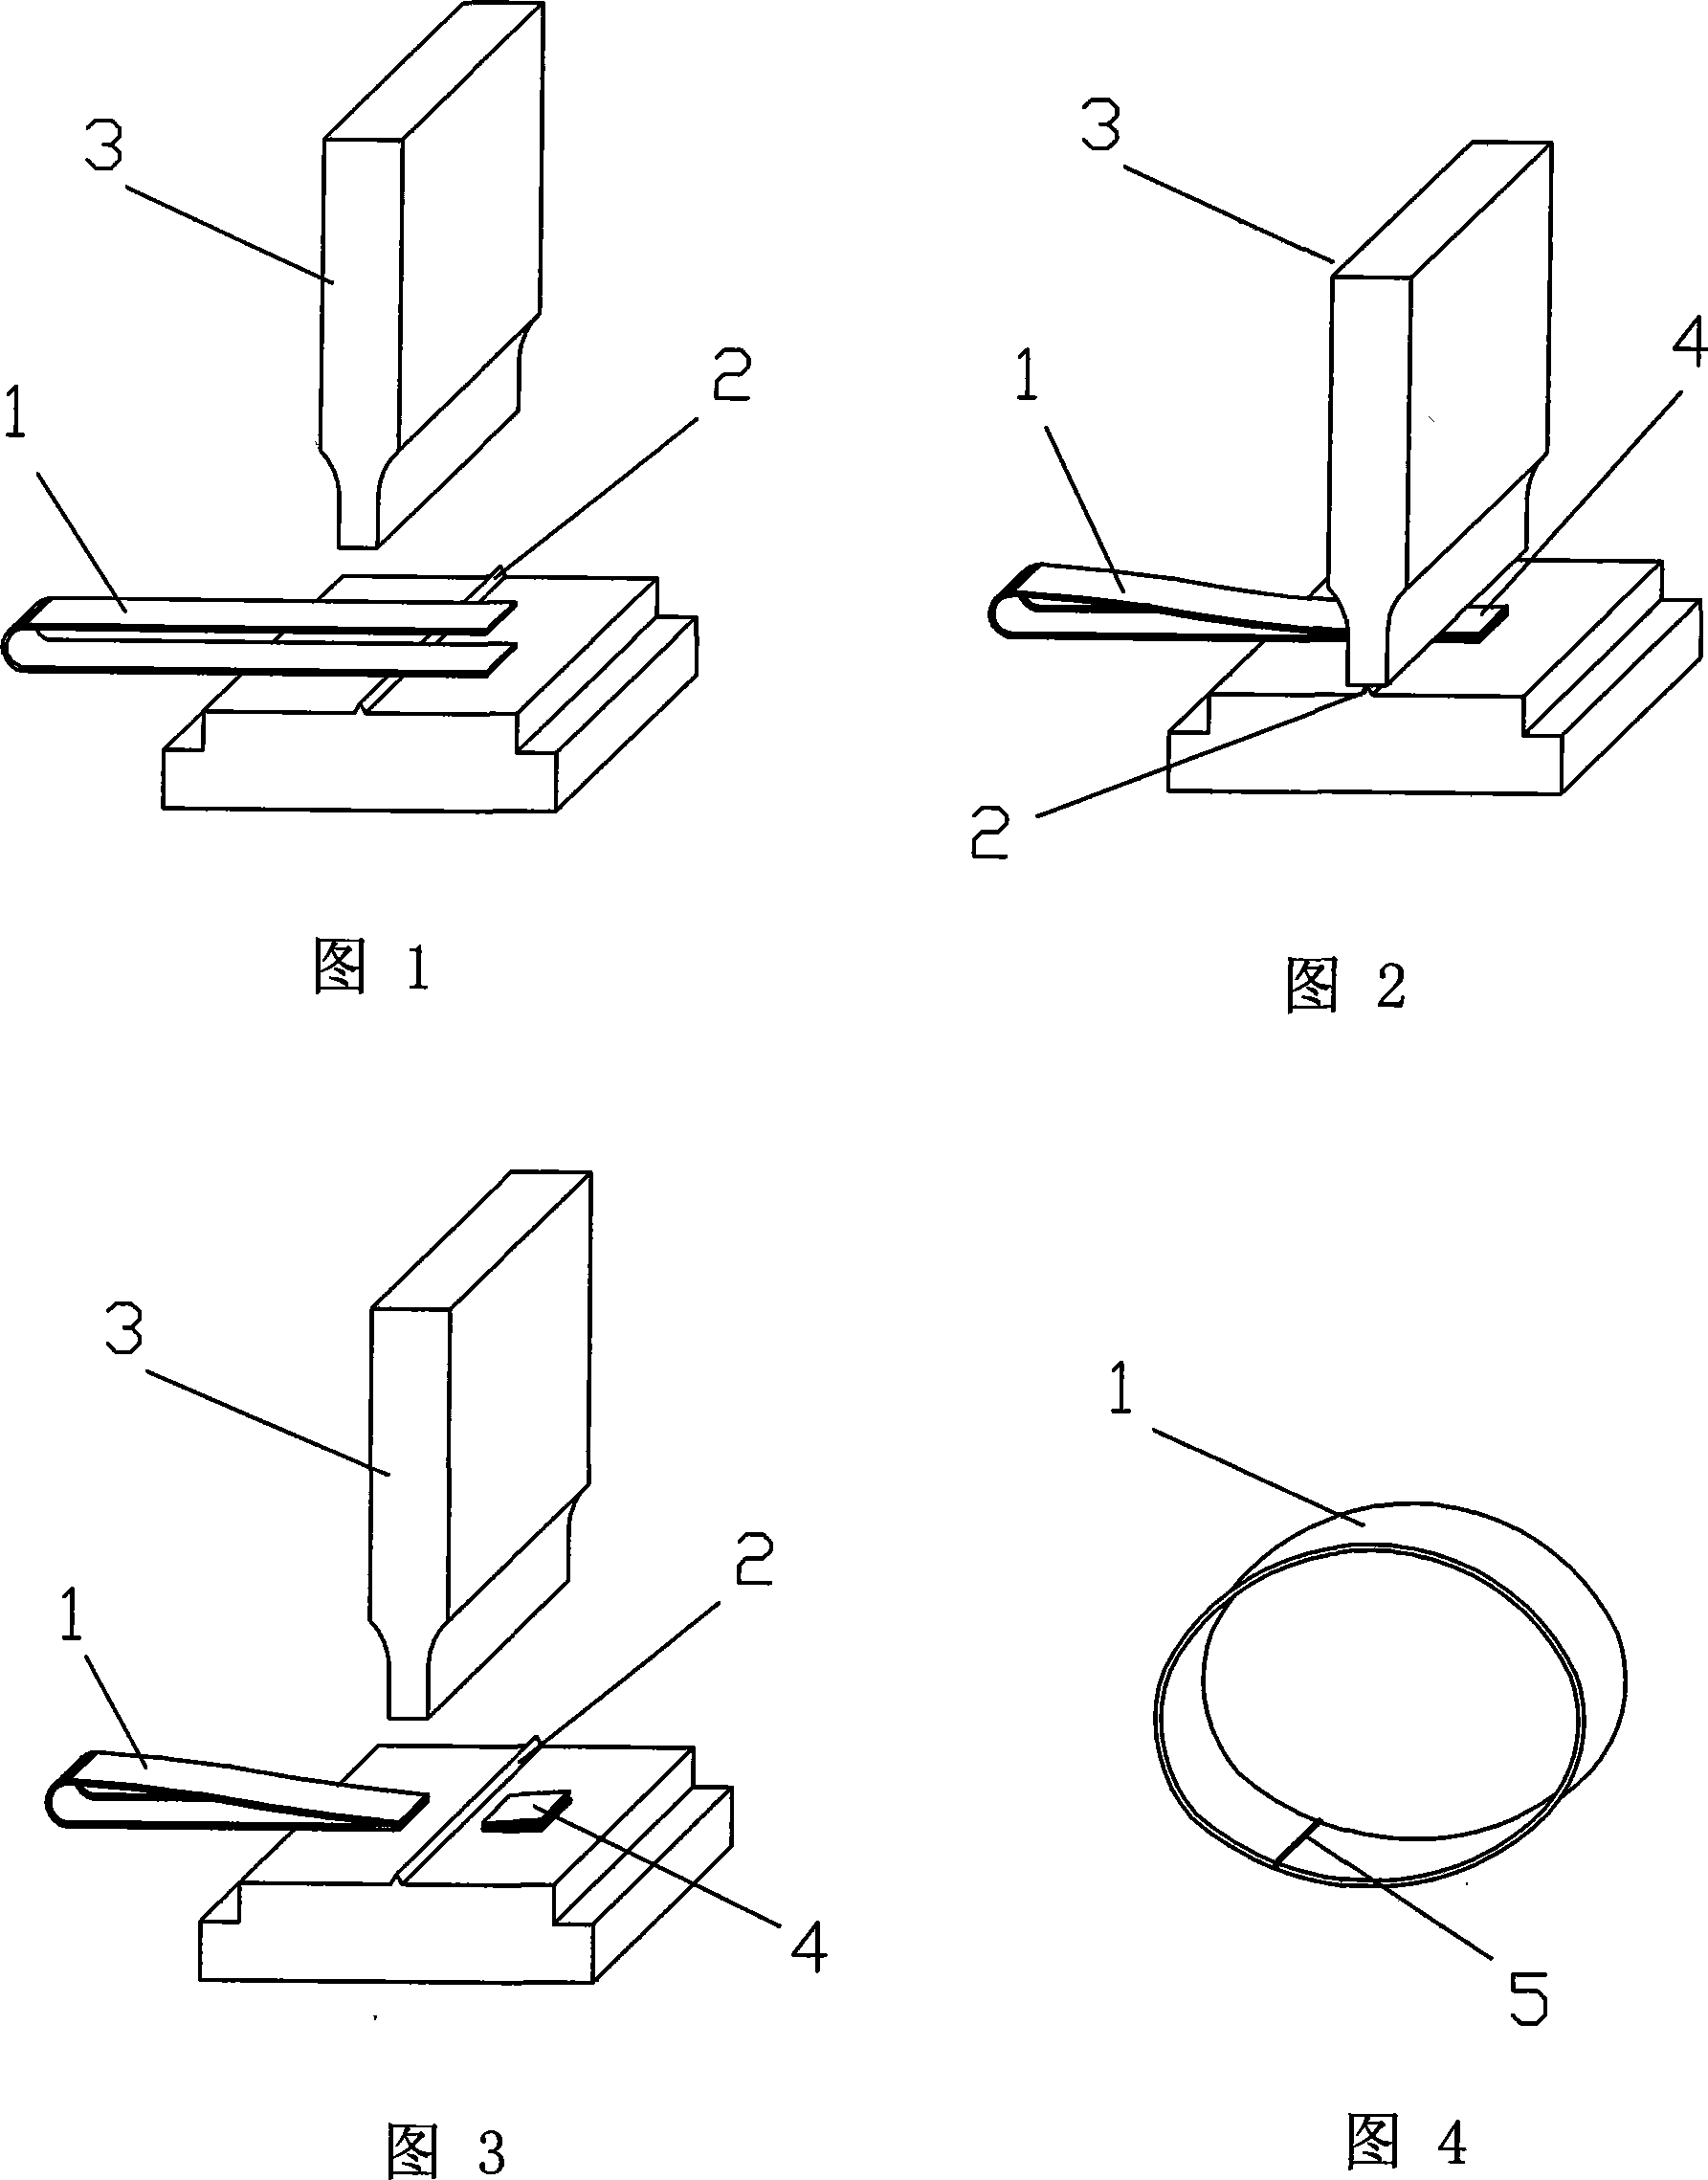 Method of soldering and cutting as well as connecting by ultrasound wave